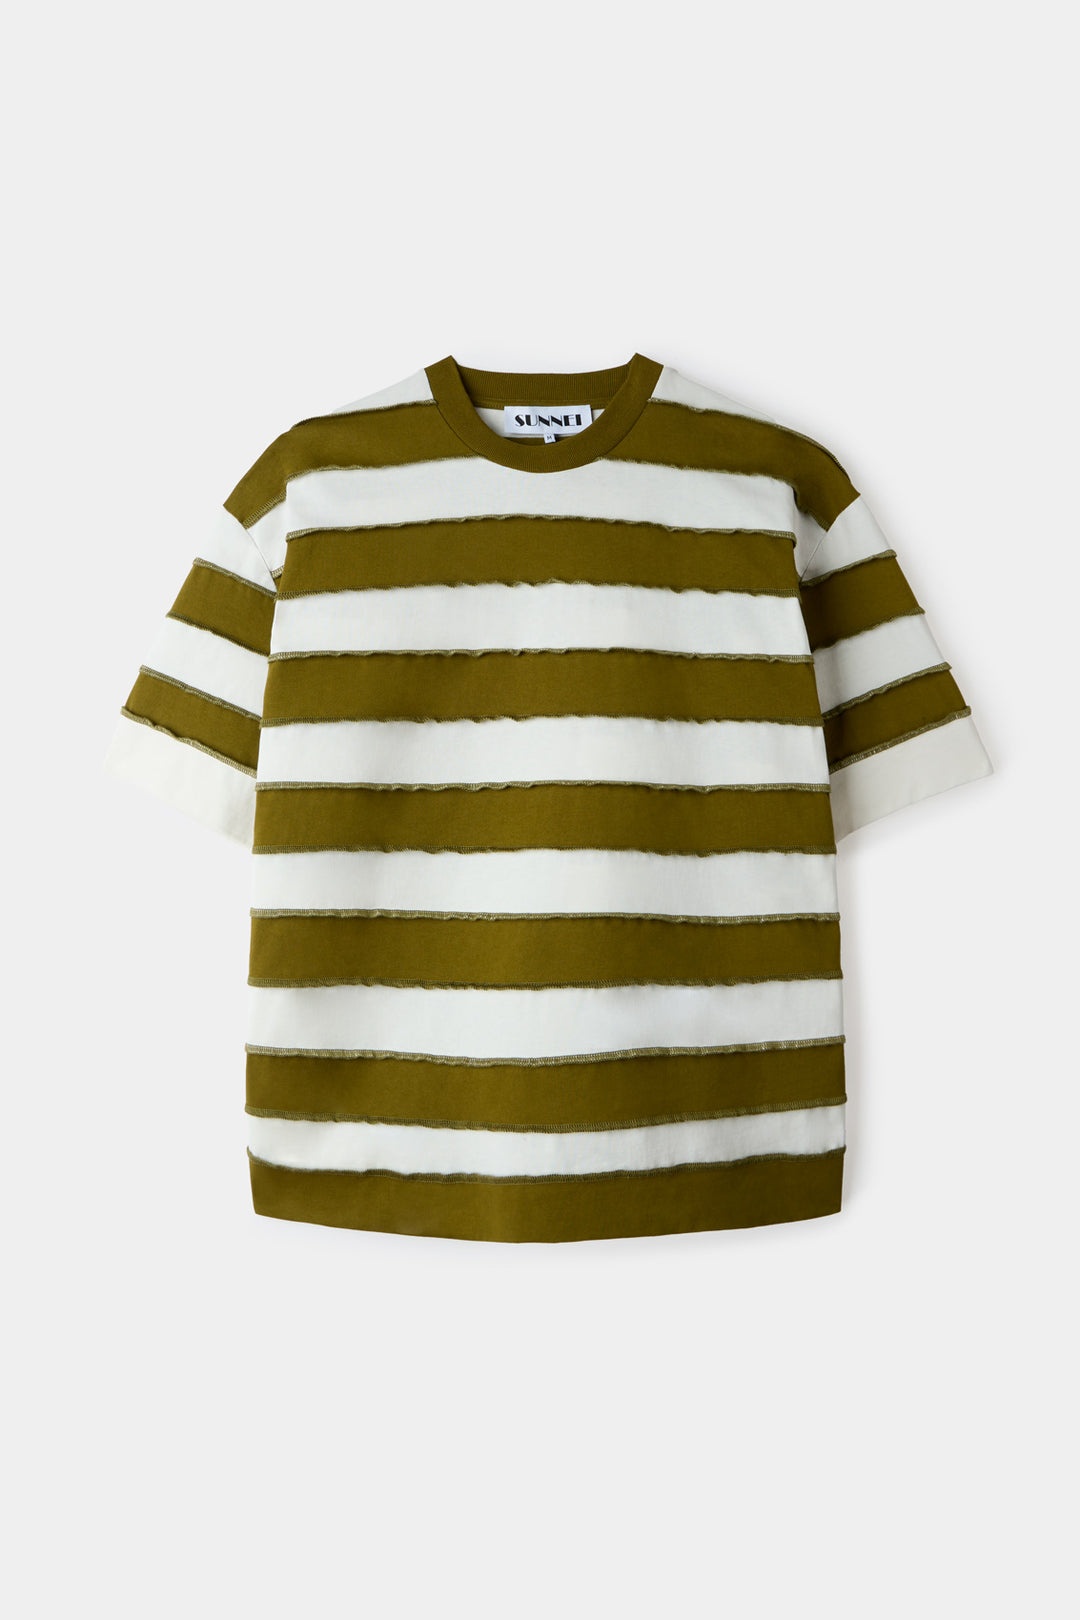 OVER T-SHIRT W/ CUTS / green & white stripes - 2